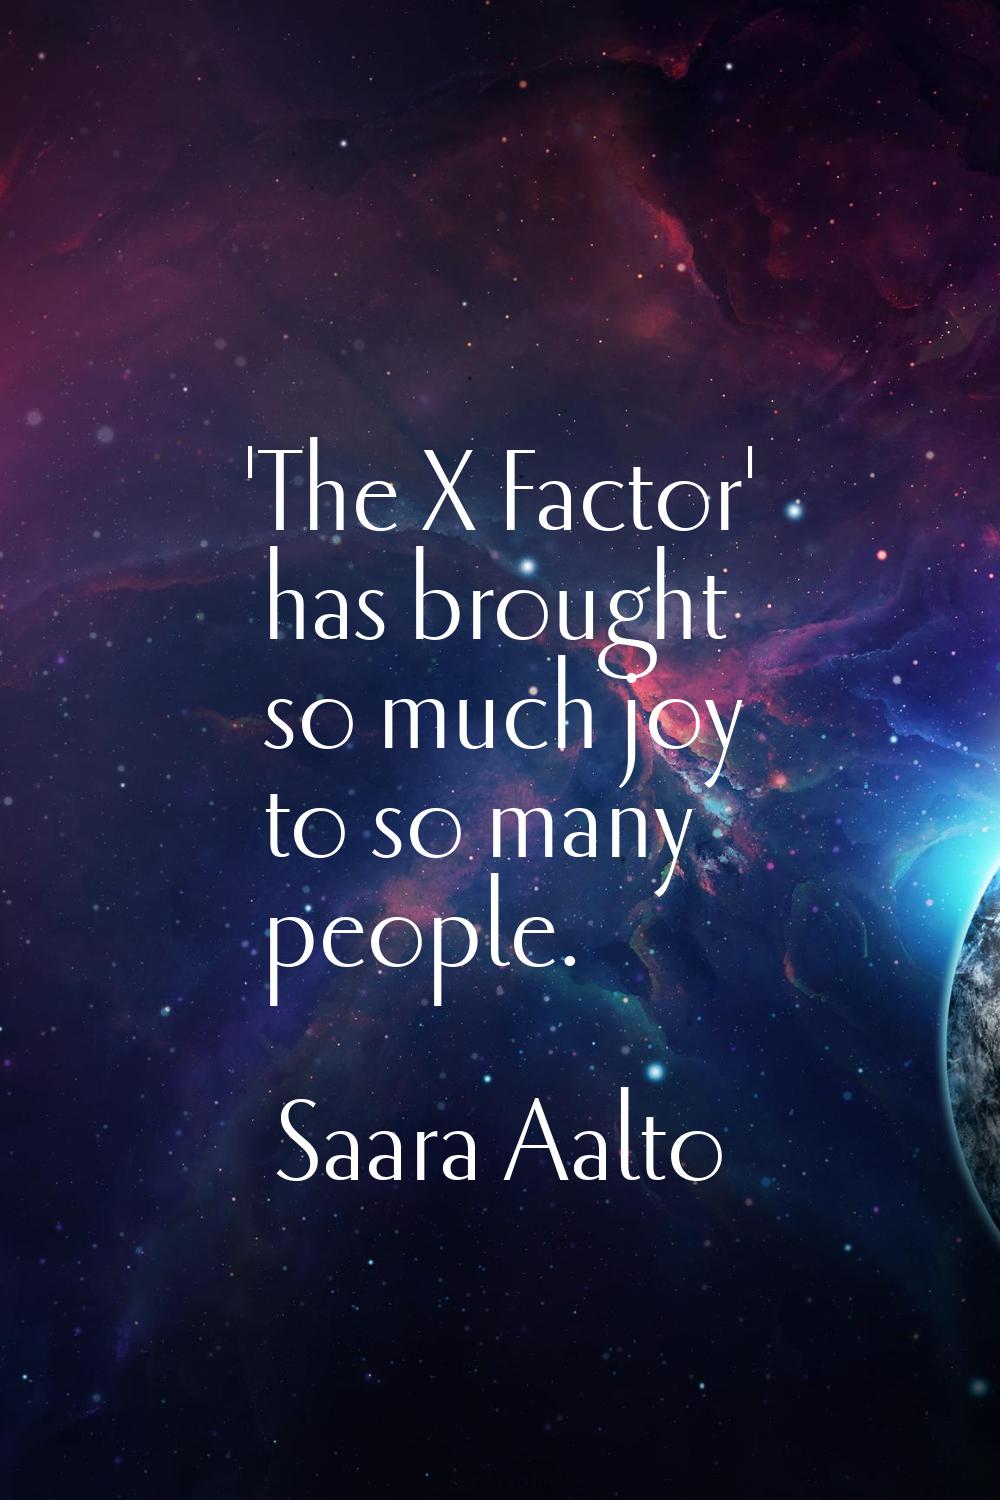 'The X Factor' has brought so much joy to so many people.